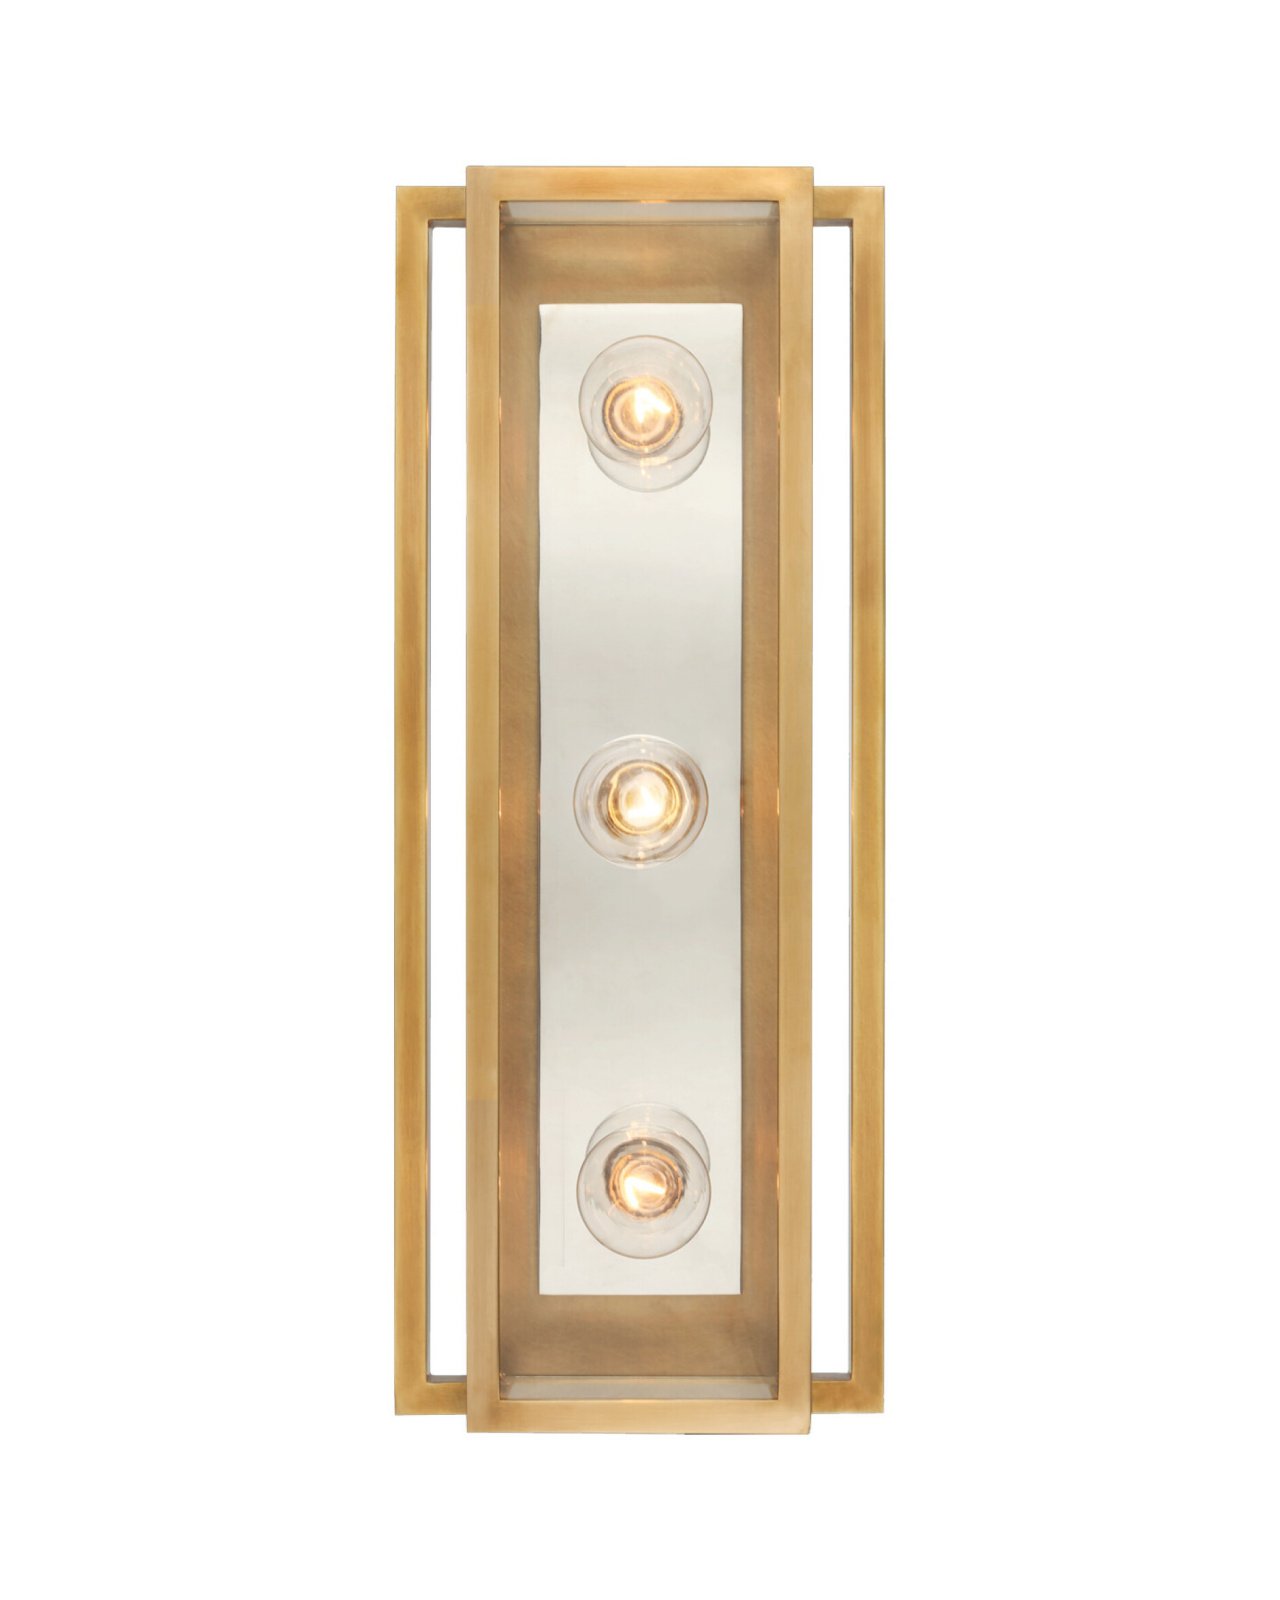 Halle 18" Vanity Light Antique Brass and Polished Nickel